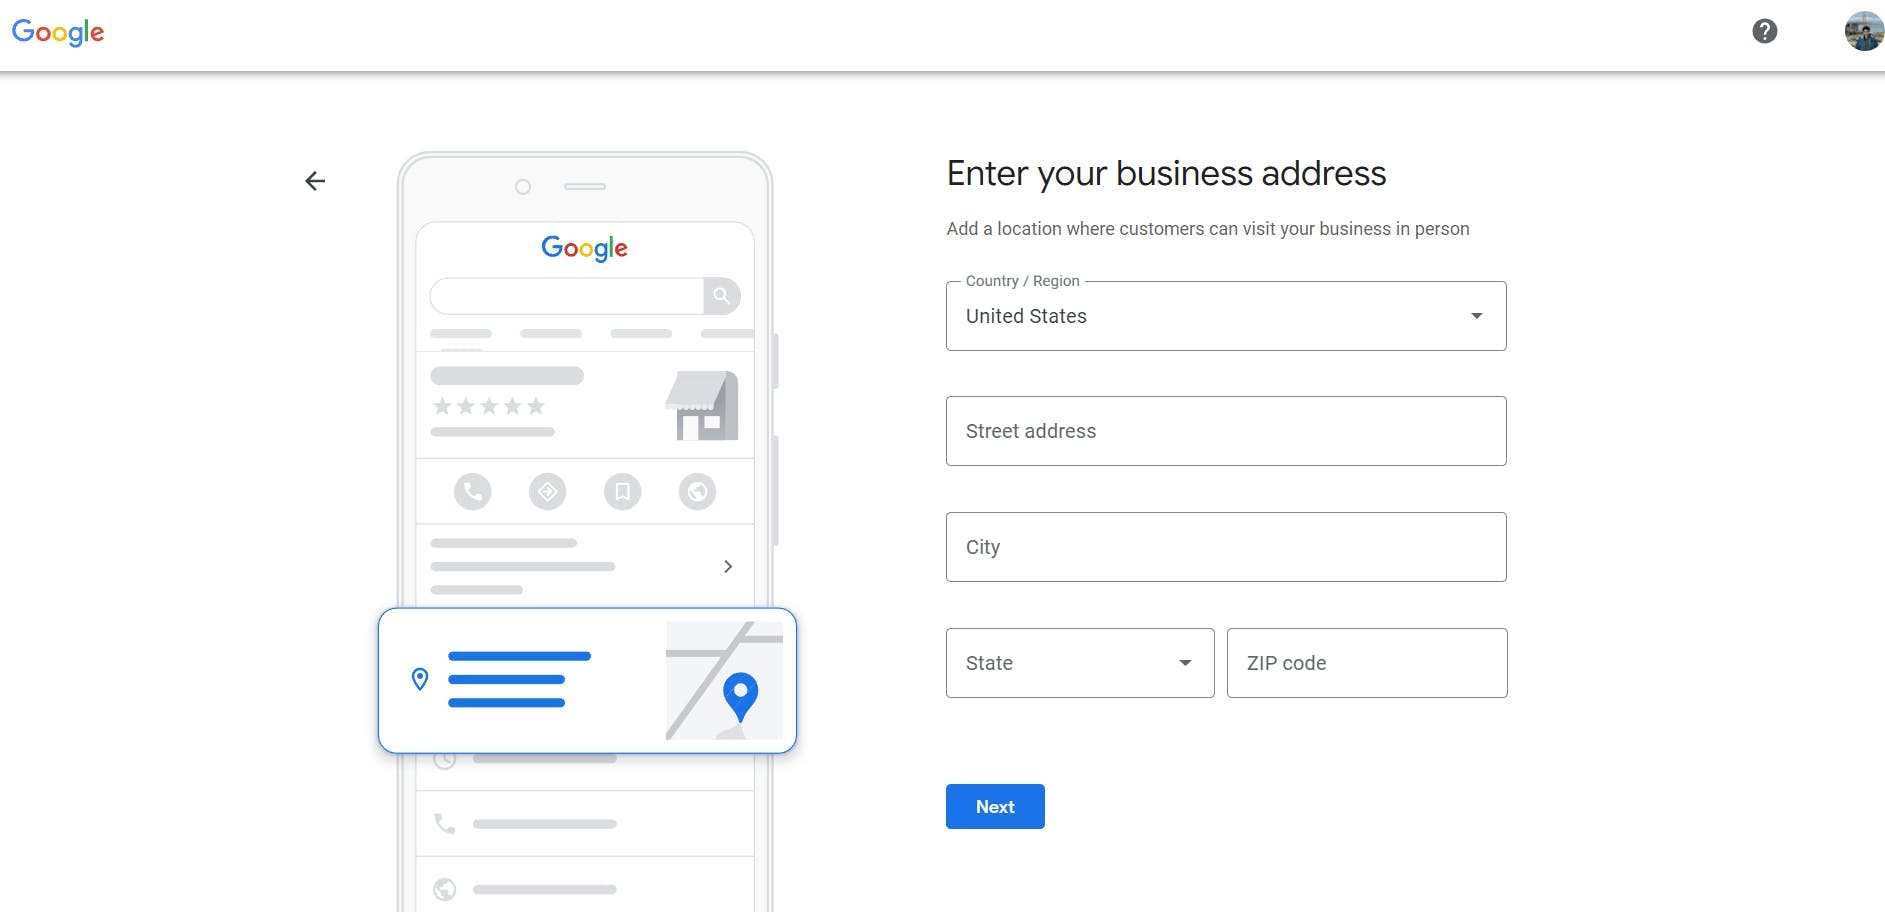 Enter your business address